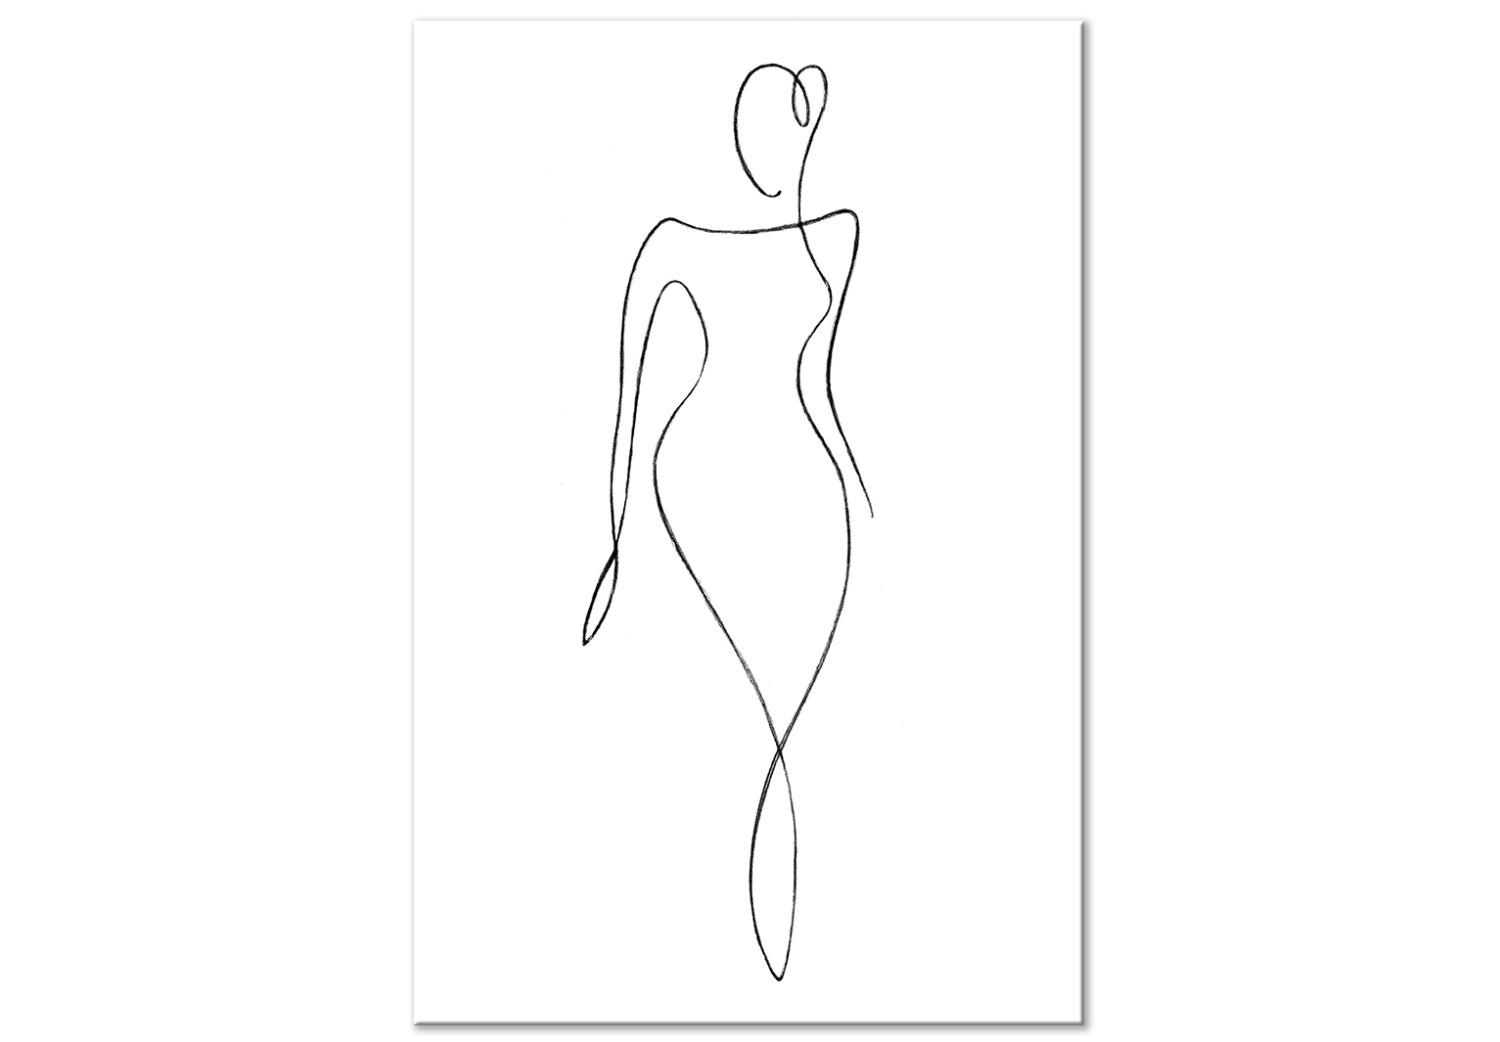 Canvas Shape of a Woman's Silhouette (1-part) - Black and White Outline of a Figure